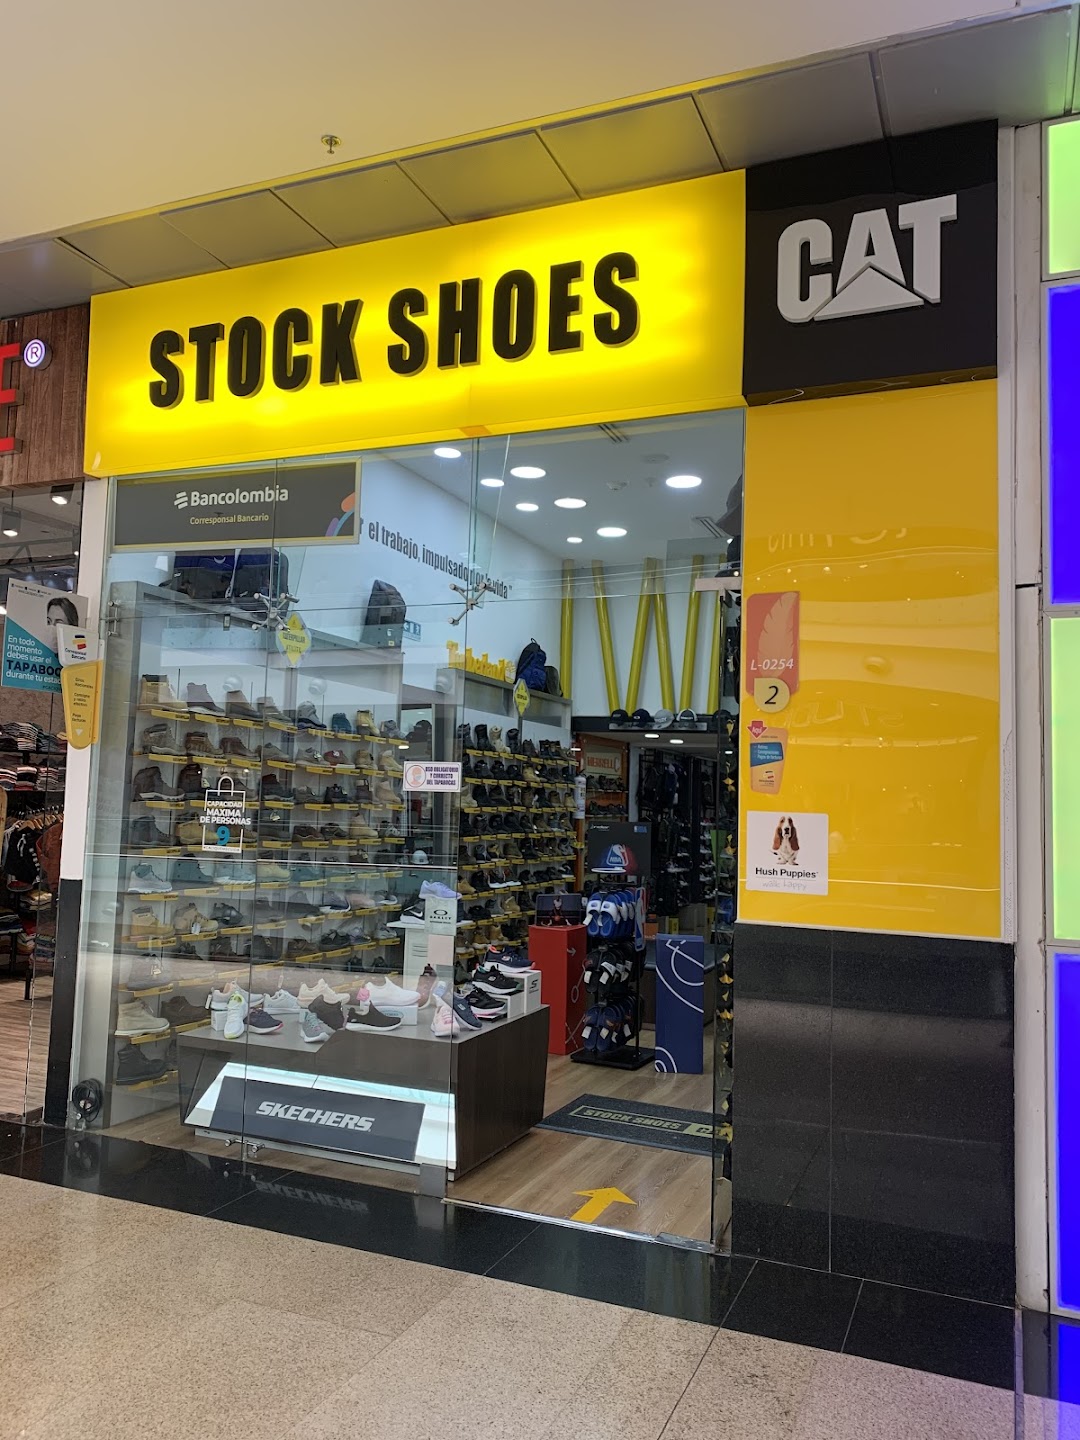 STOCK SHOES CAT